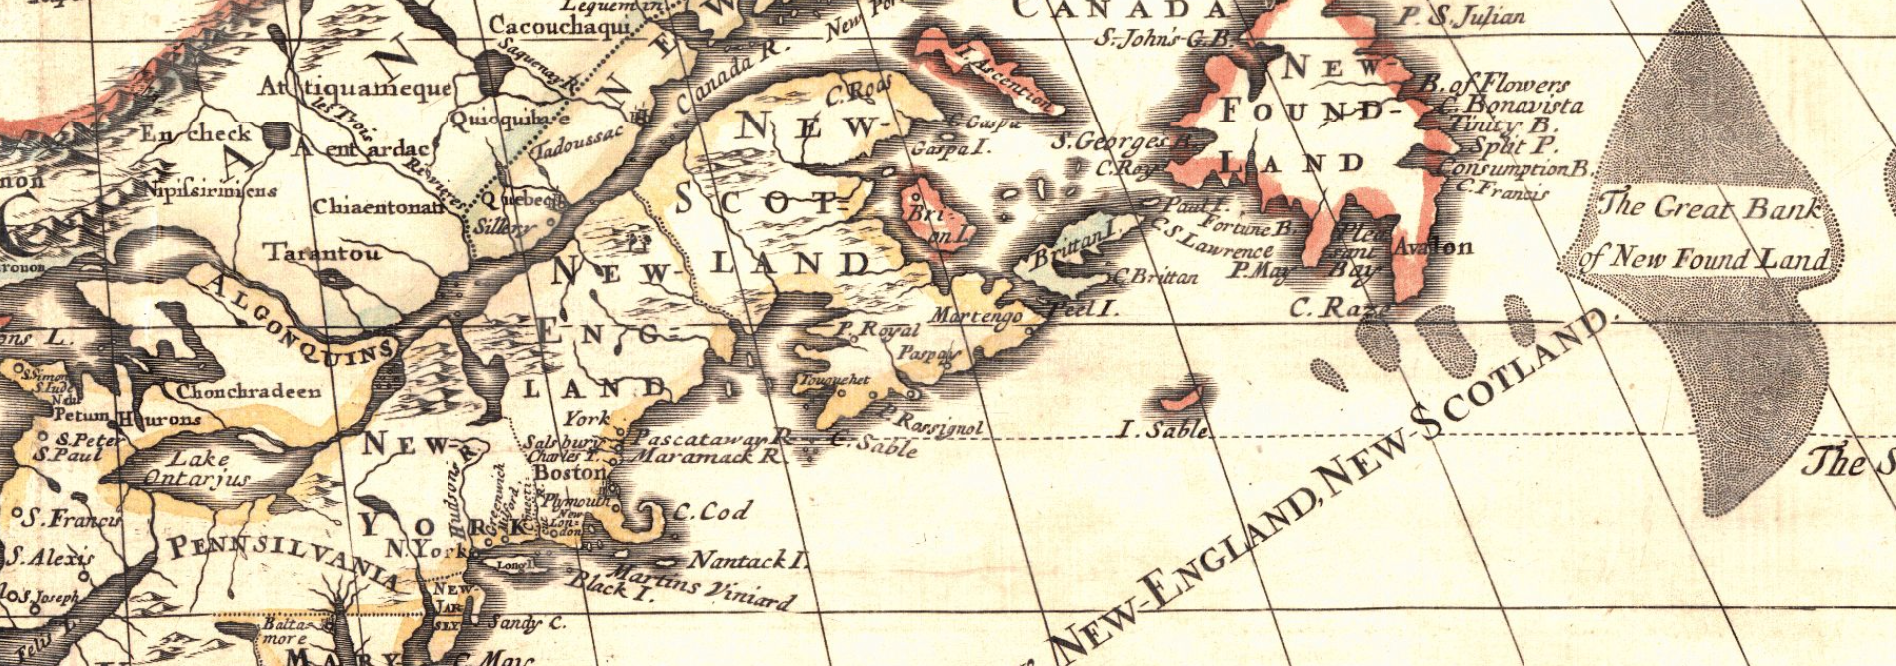 Detail from Hennepin's 1698 map of eastern North America